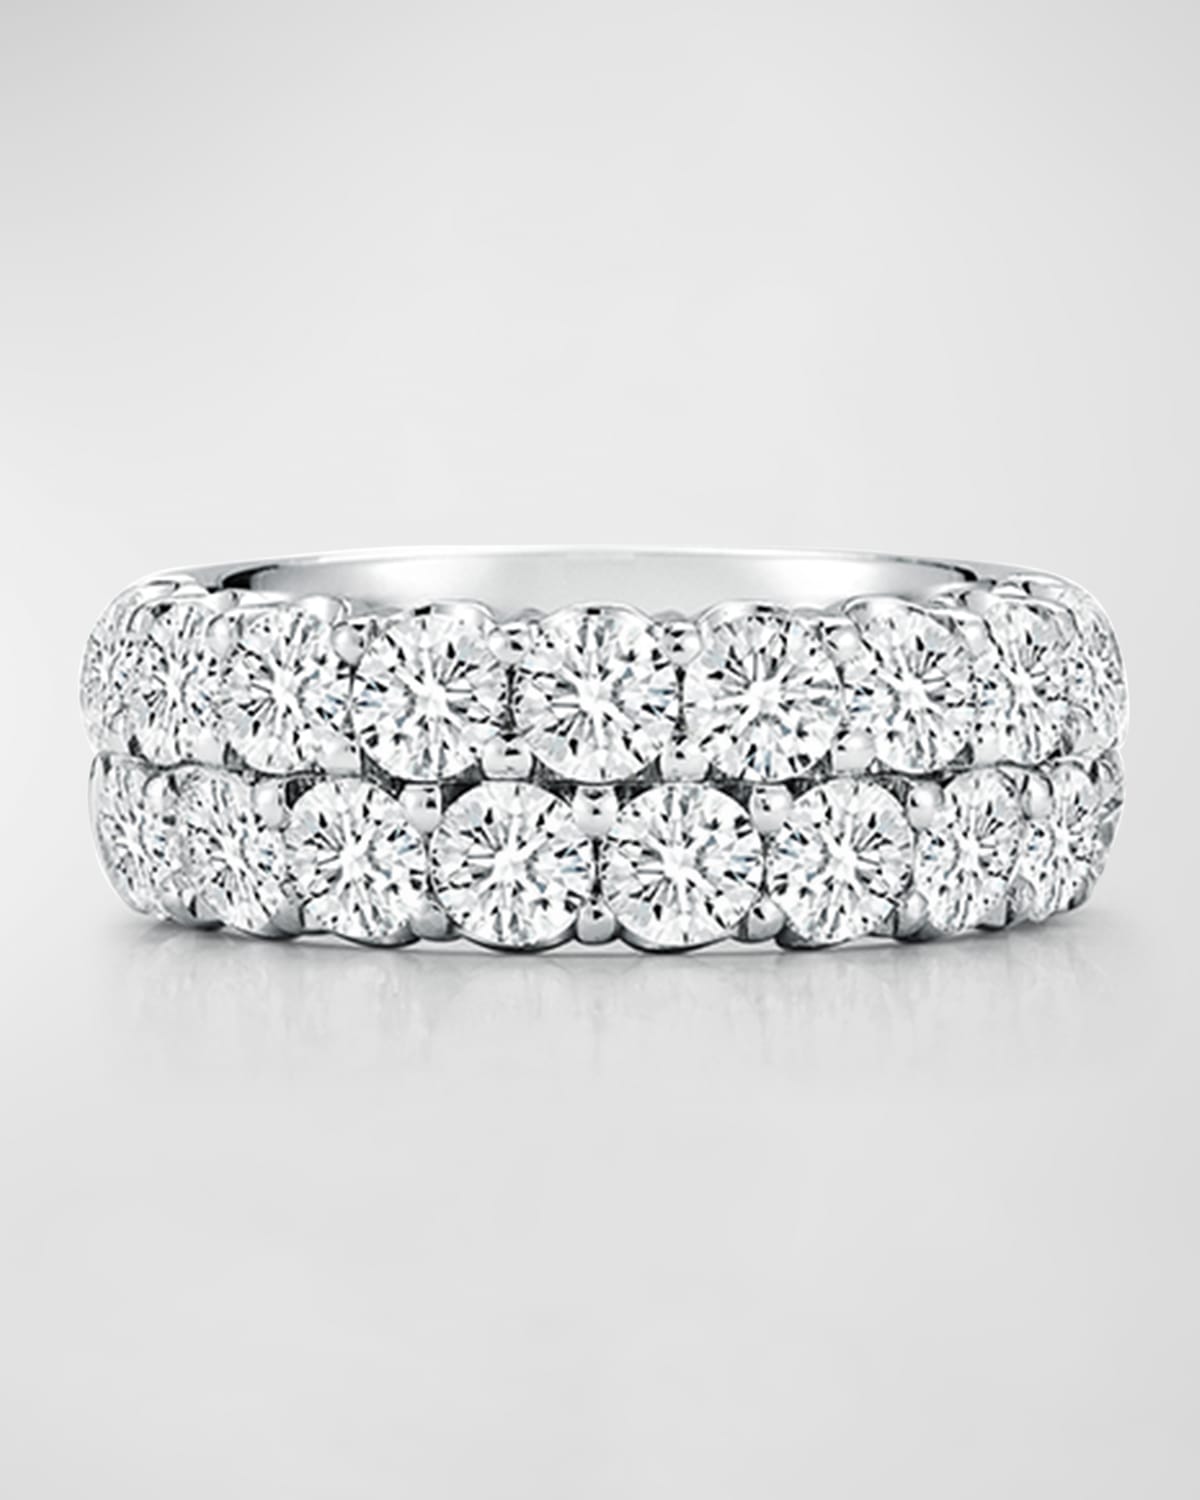 NM Diamond Collection Two-Row Diamond Eternity Band Ring in 18K White Gold, Size 6.75